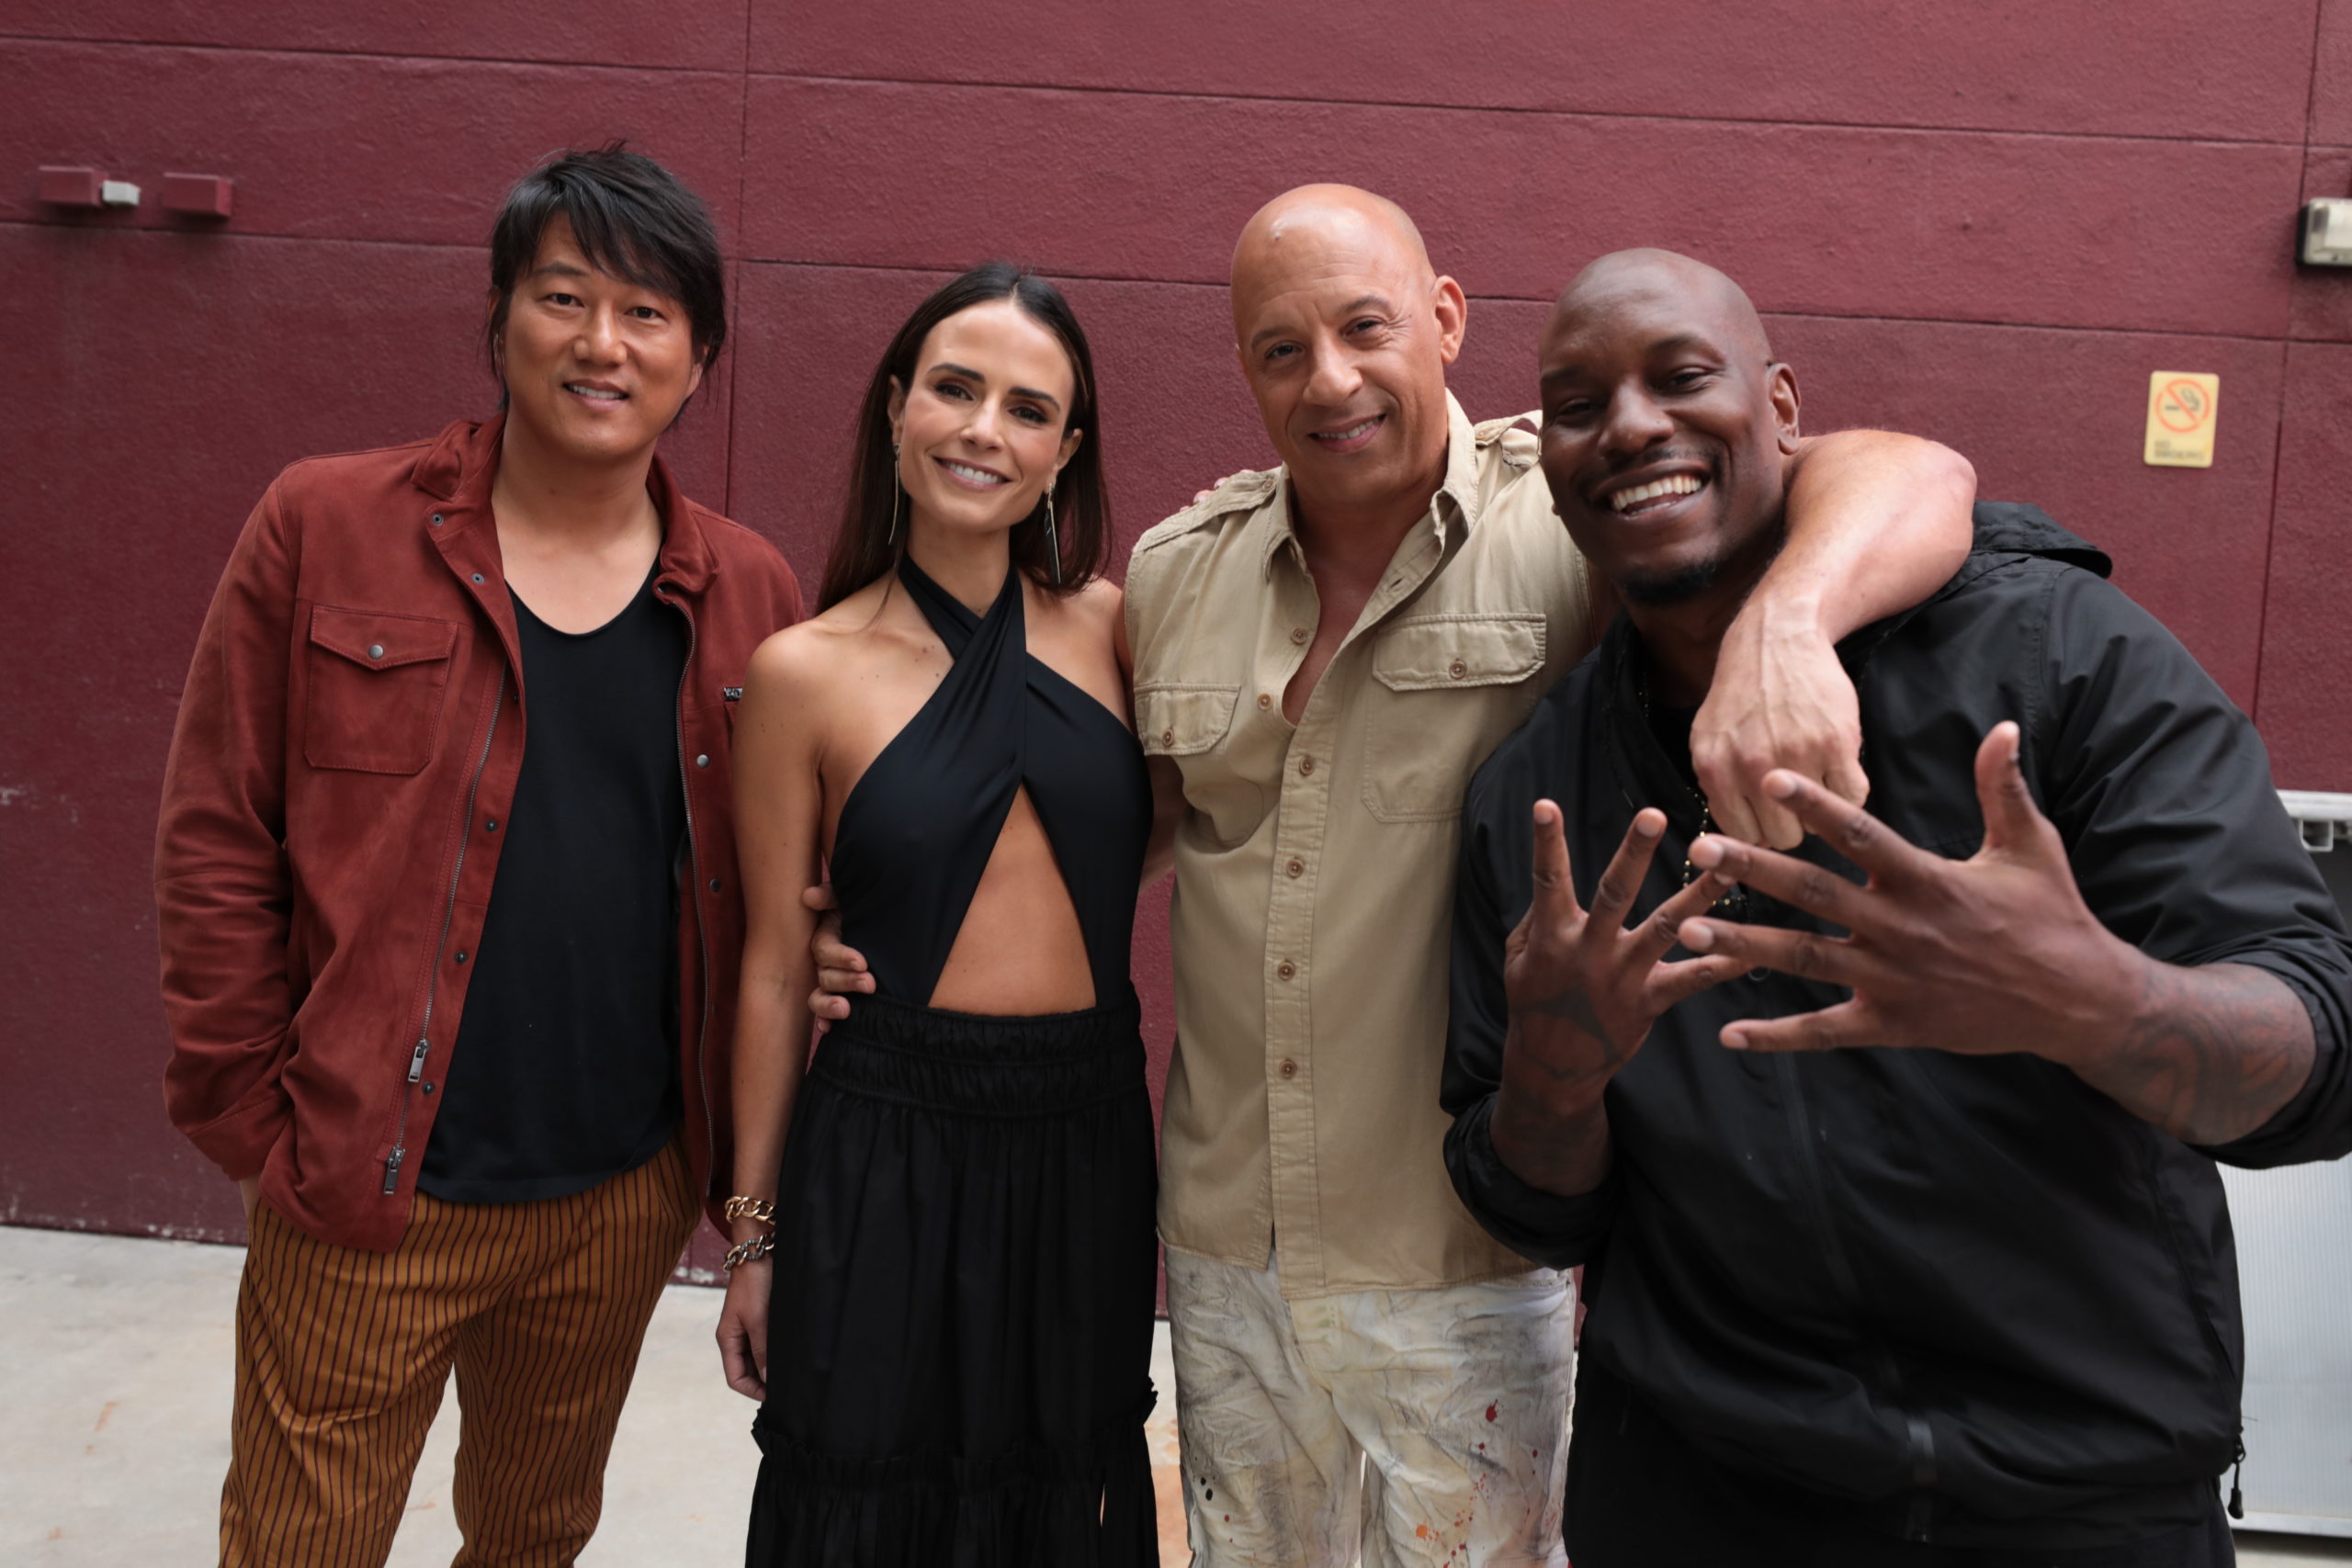 F9 Fan Event Photo with Sung Kang, Jordana Brewster, Vin Diesel, Tyrese Gibson